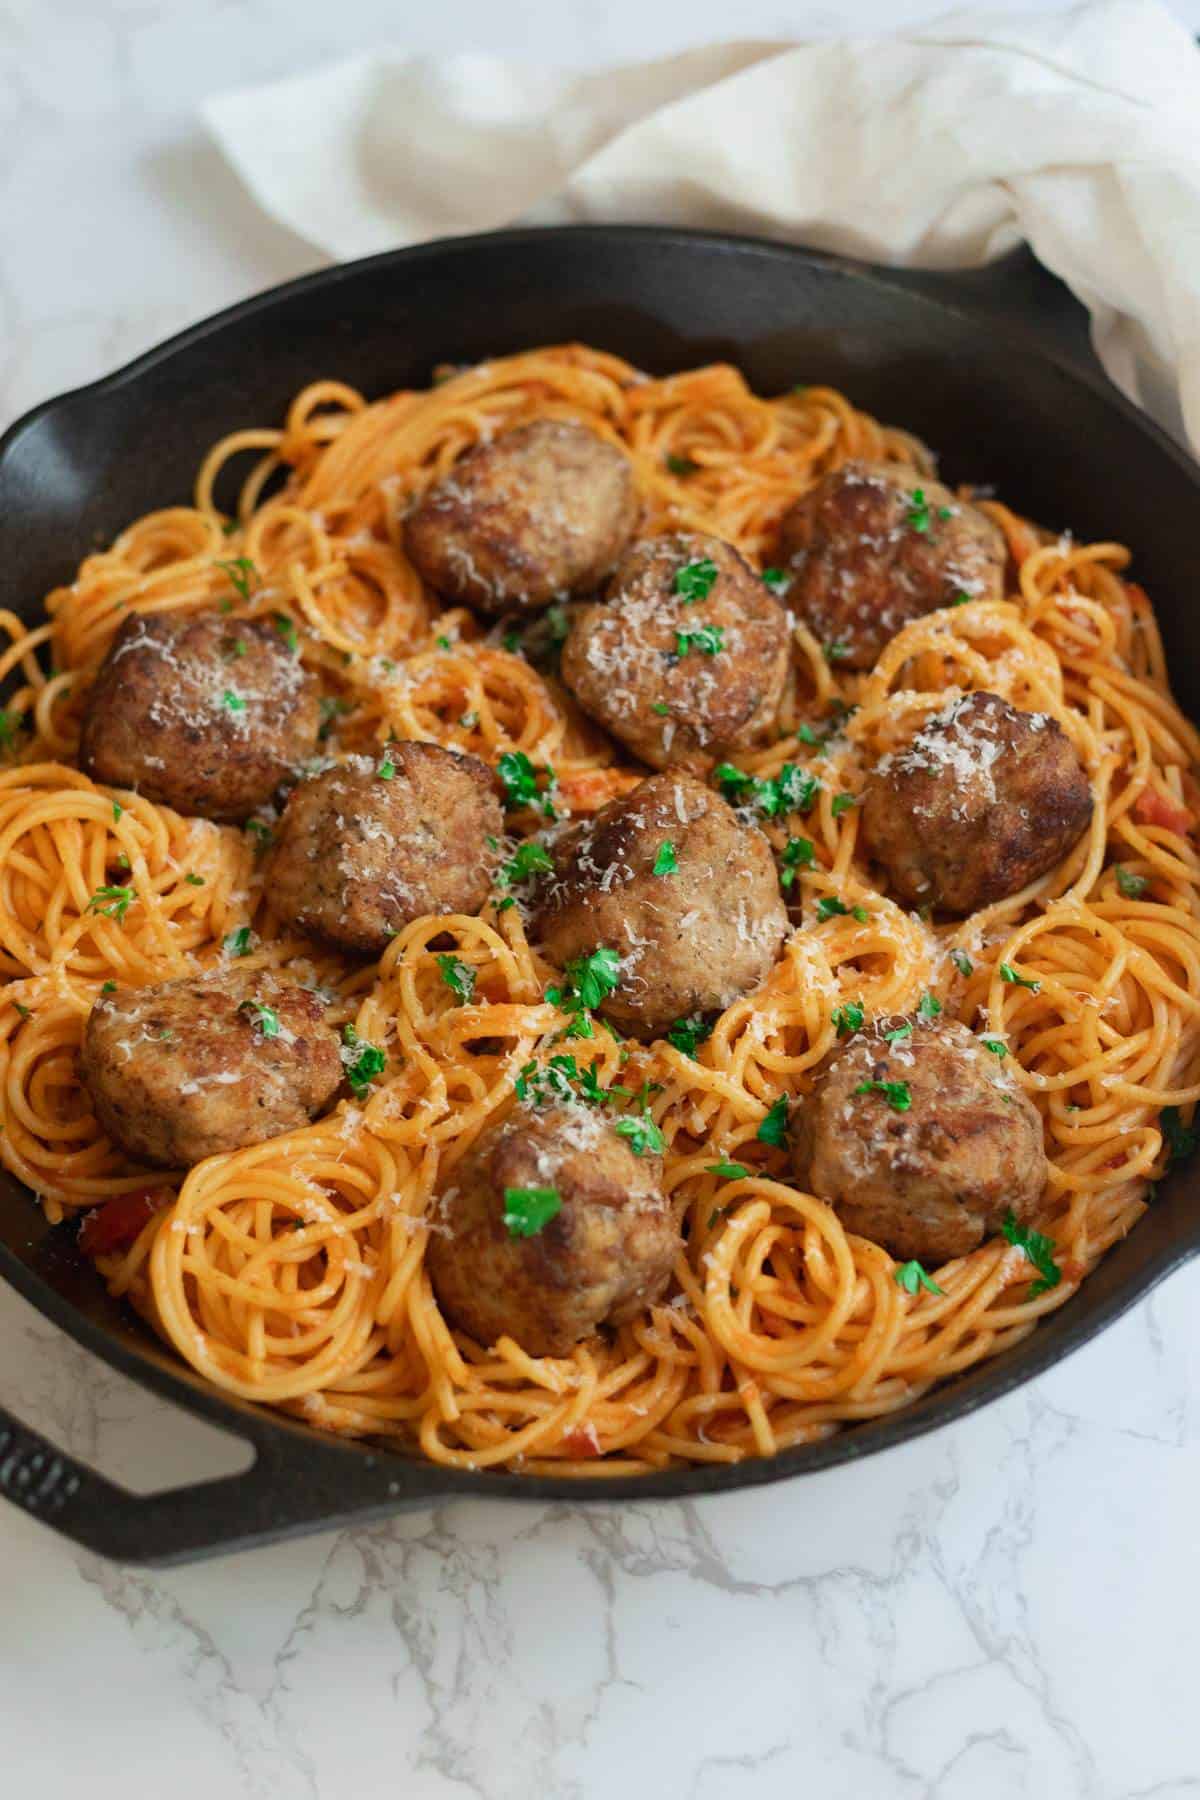 meatballs surrounded by spaghetti in tomato sauce in a cast iron skillet